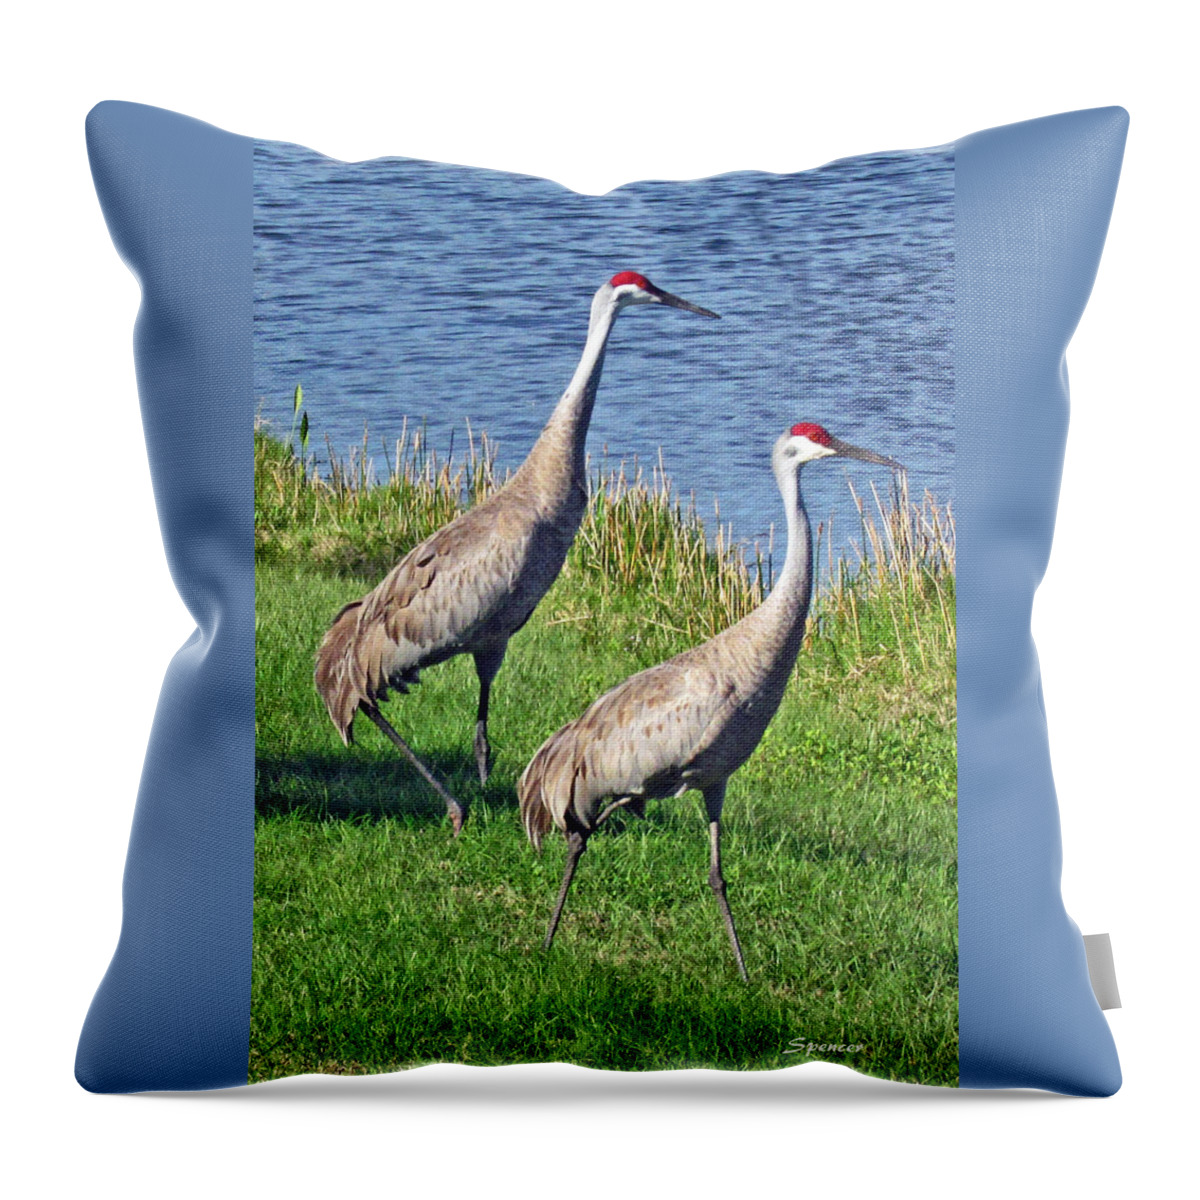 Sandill Throw Pillow featuring the photograph Sandhill Pair by T Guy Spencer